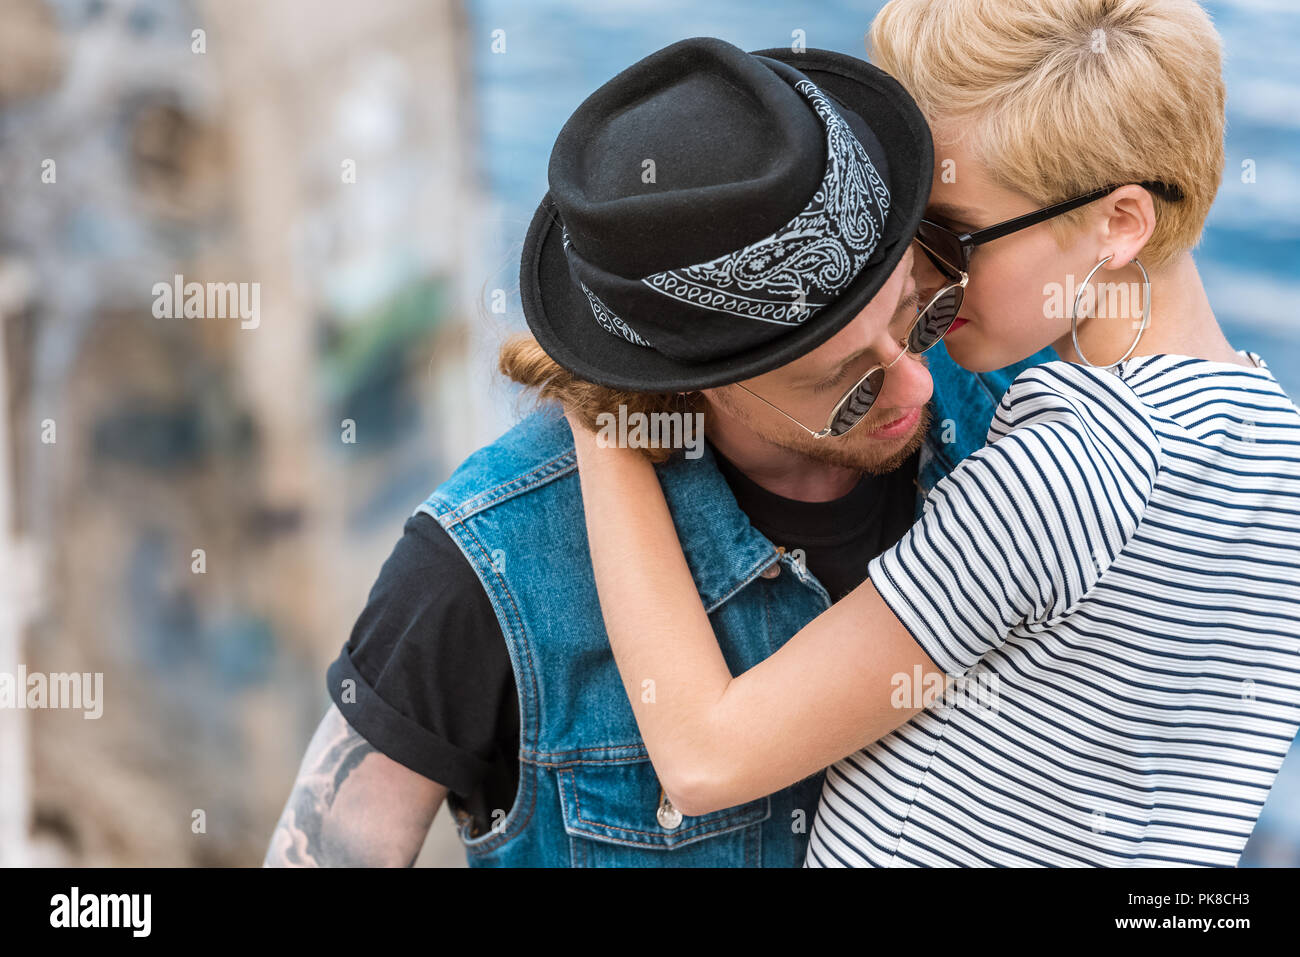 Tattooed Girlfriend Looking At Camera And Hugging Free Stock Photo and  Image 180336794